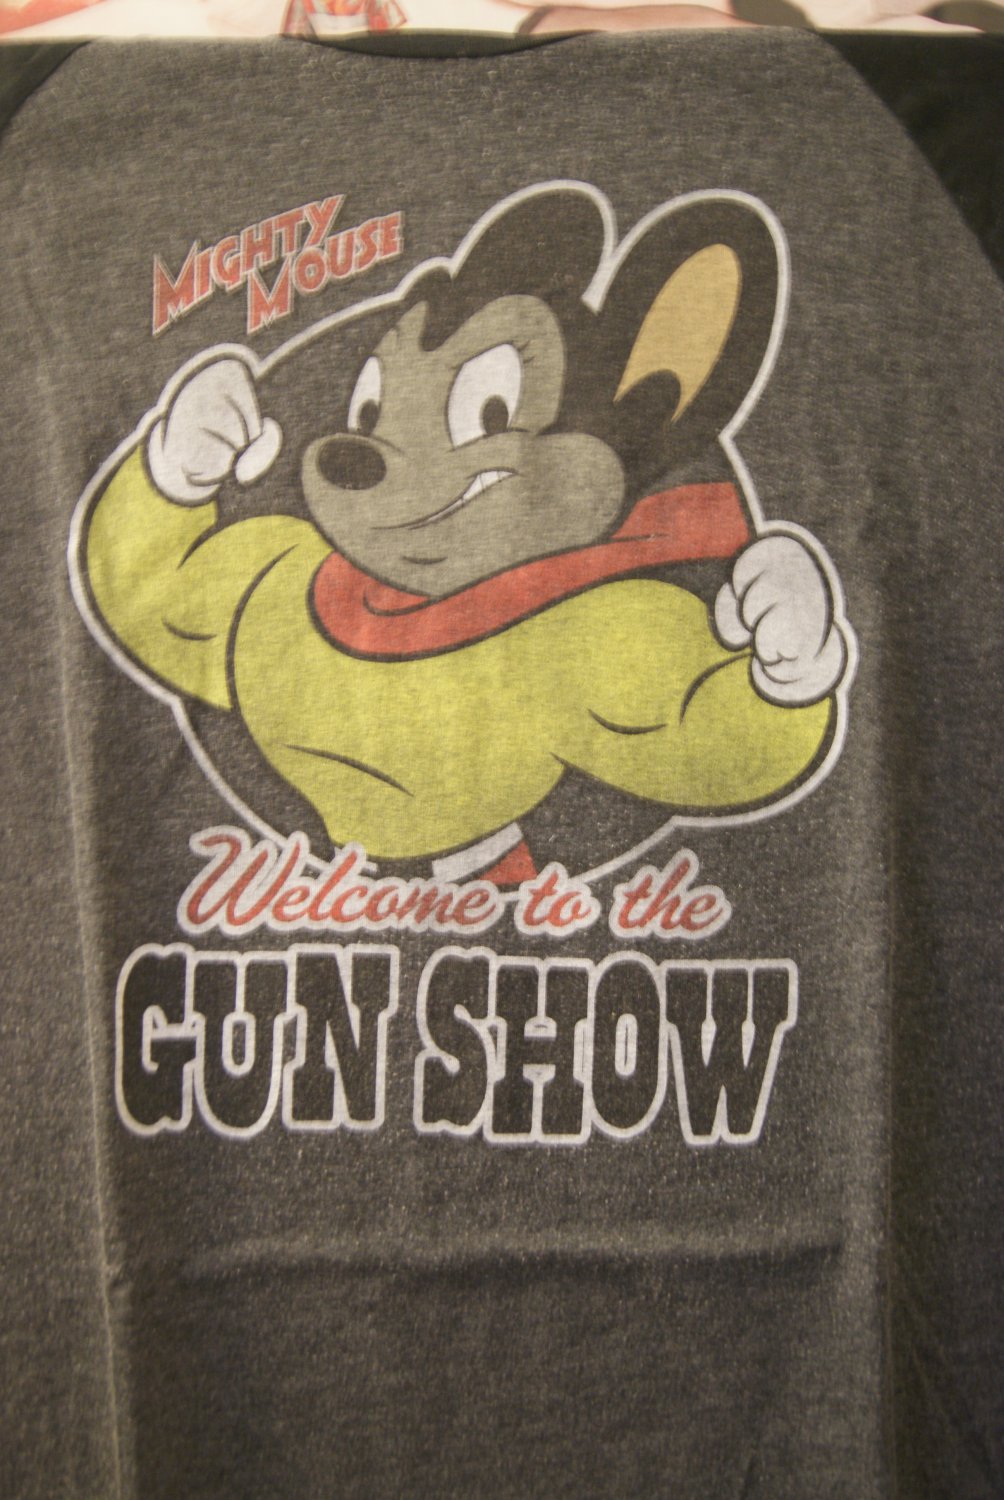 Mighty Mouse tee